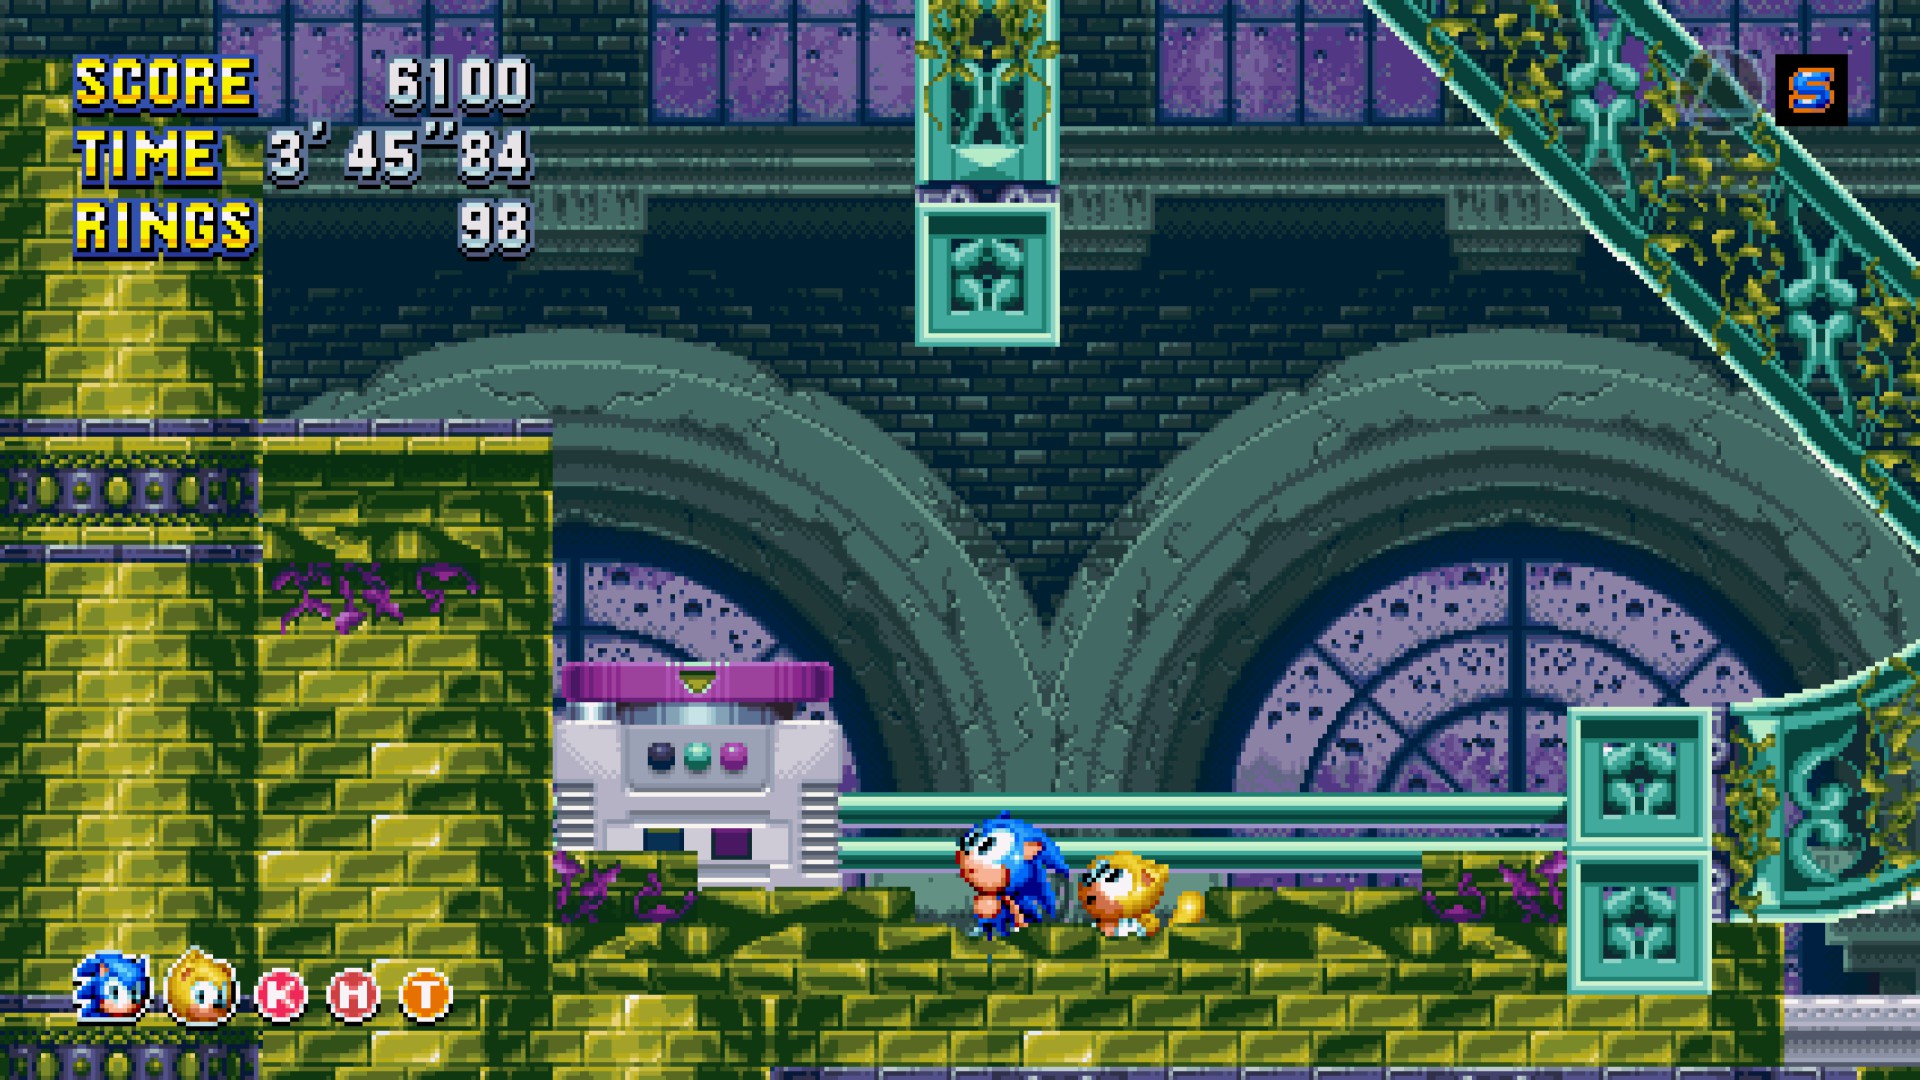 Mania Madness Ep. 1 Preview Green Hill Zone W.I.P. (Sprite Animation) 